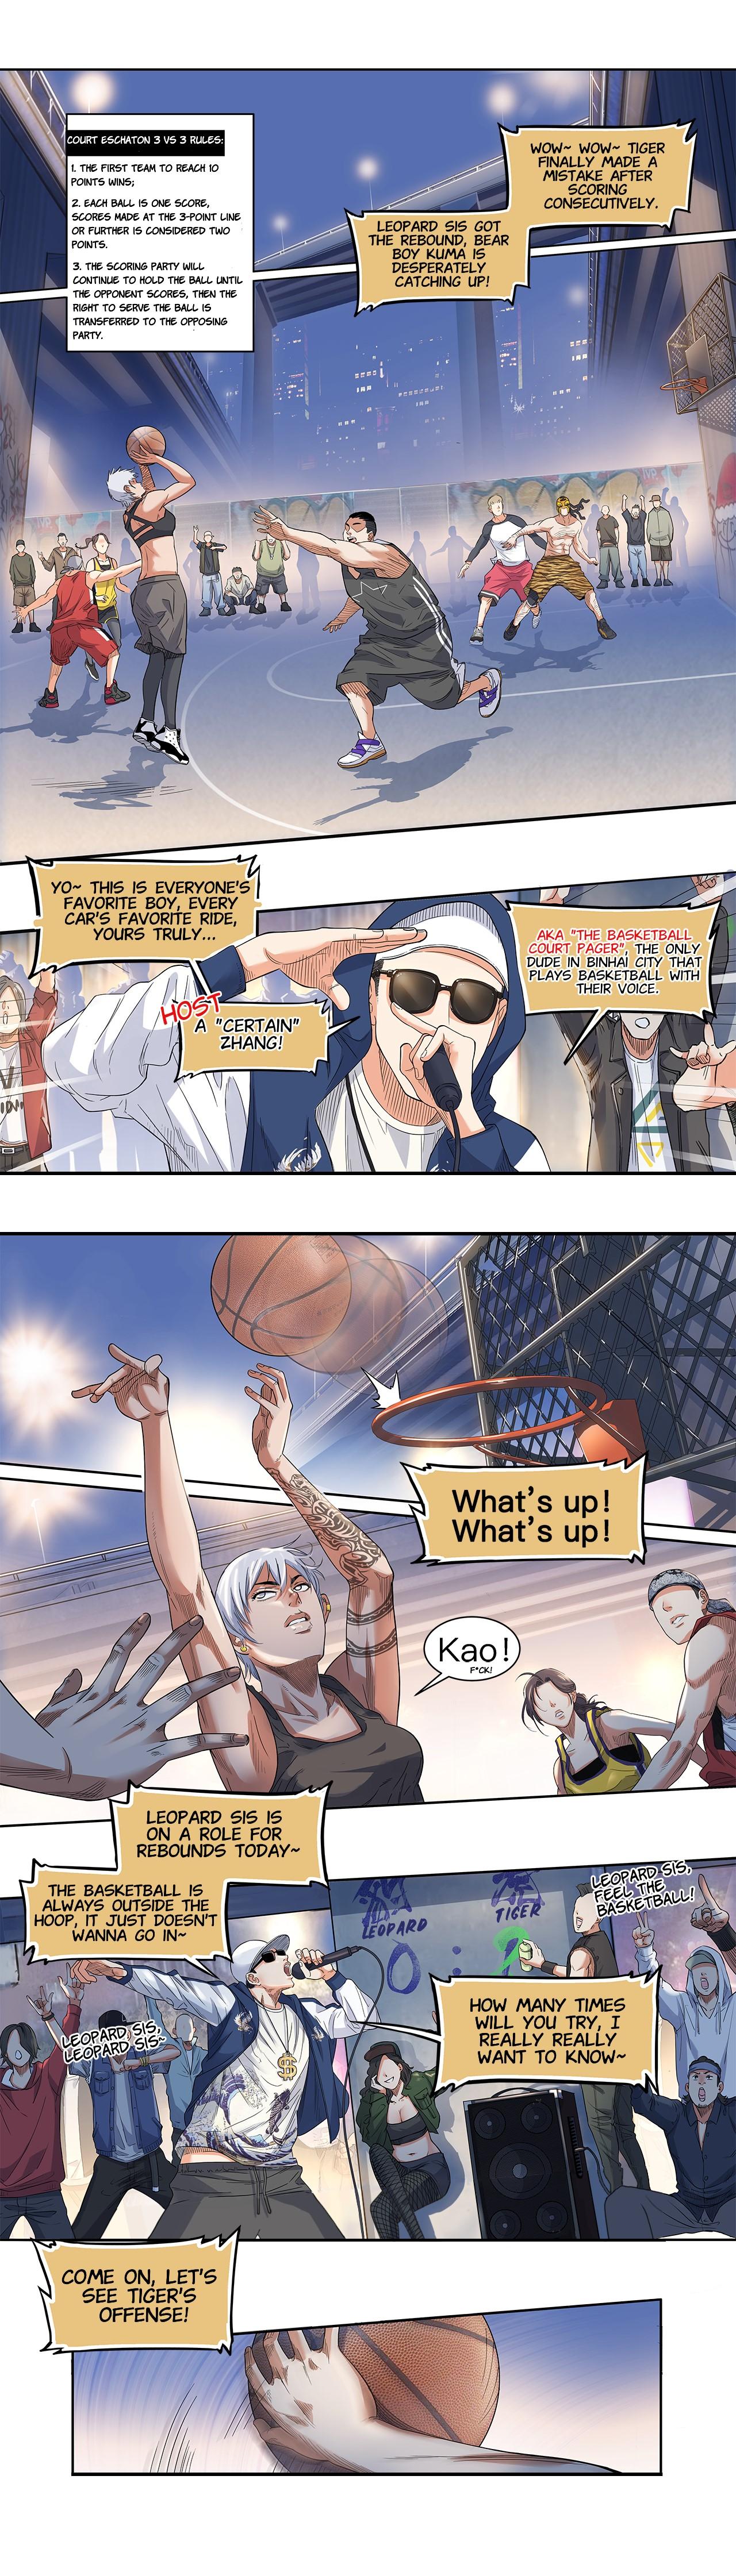 Streetball In The Hood - Page 2